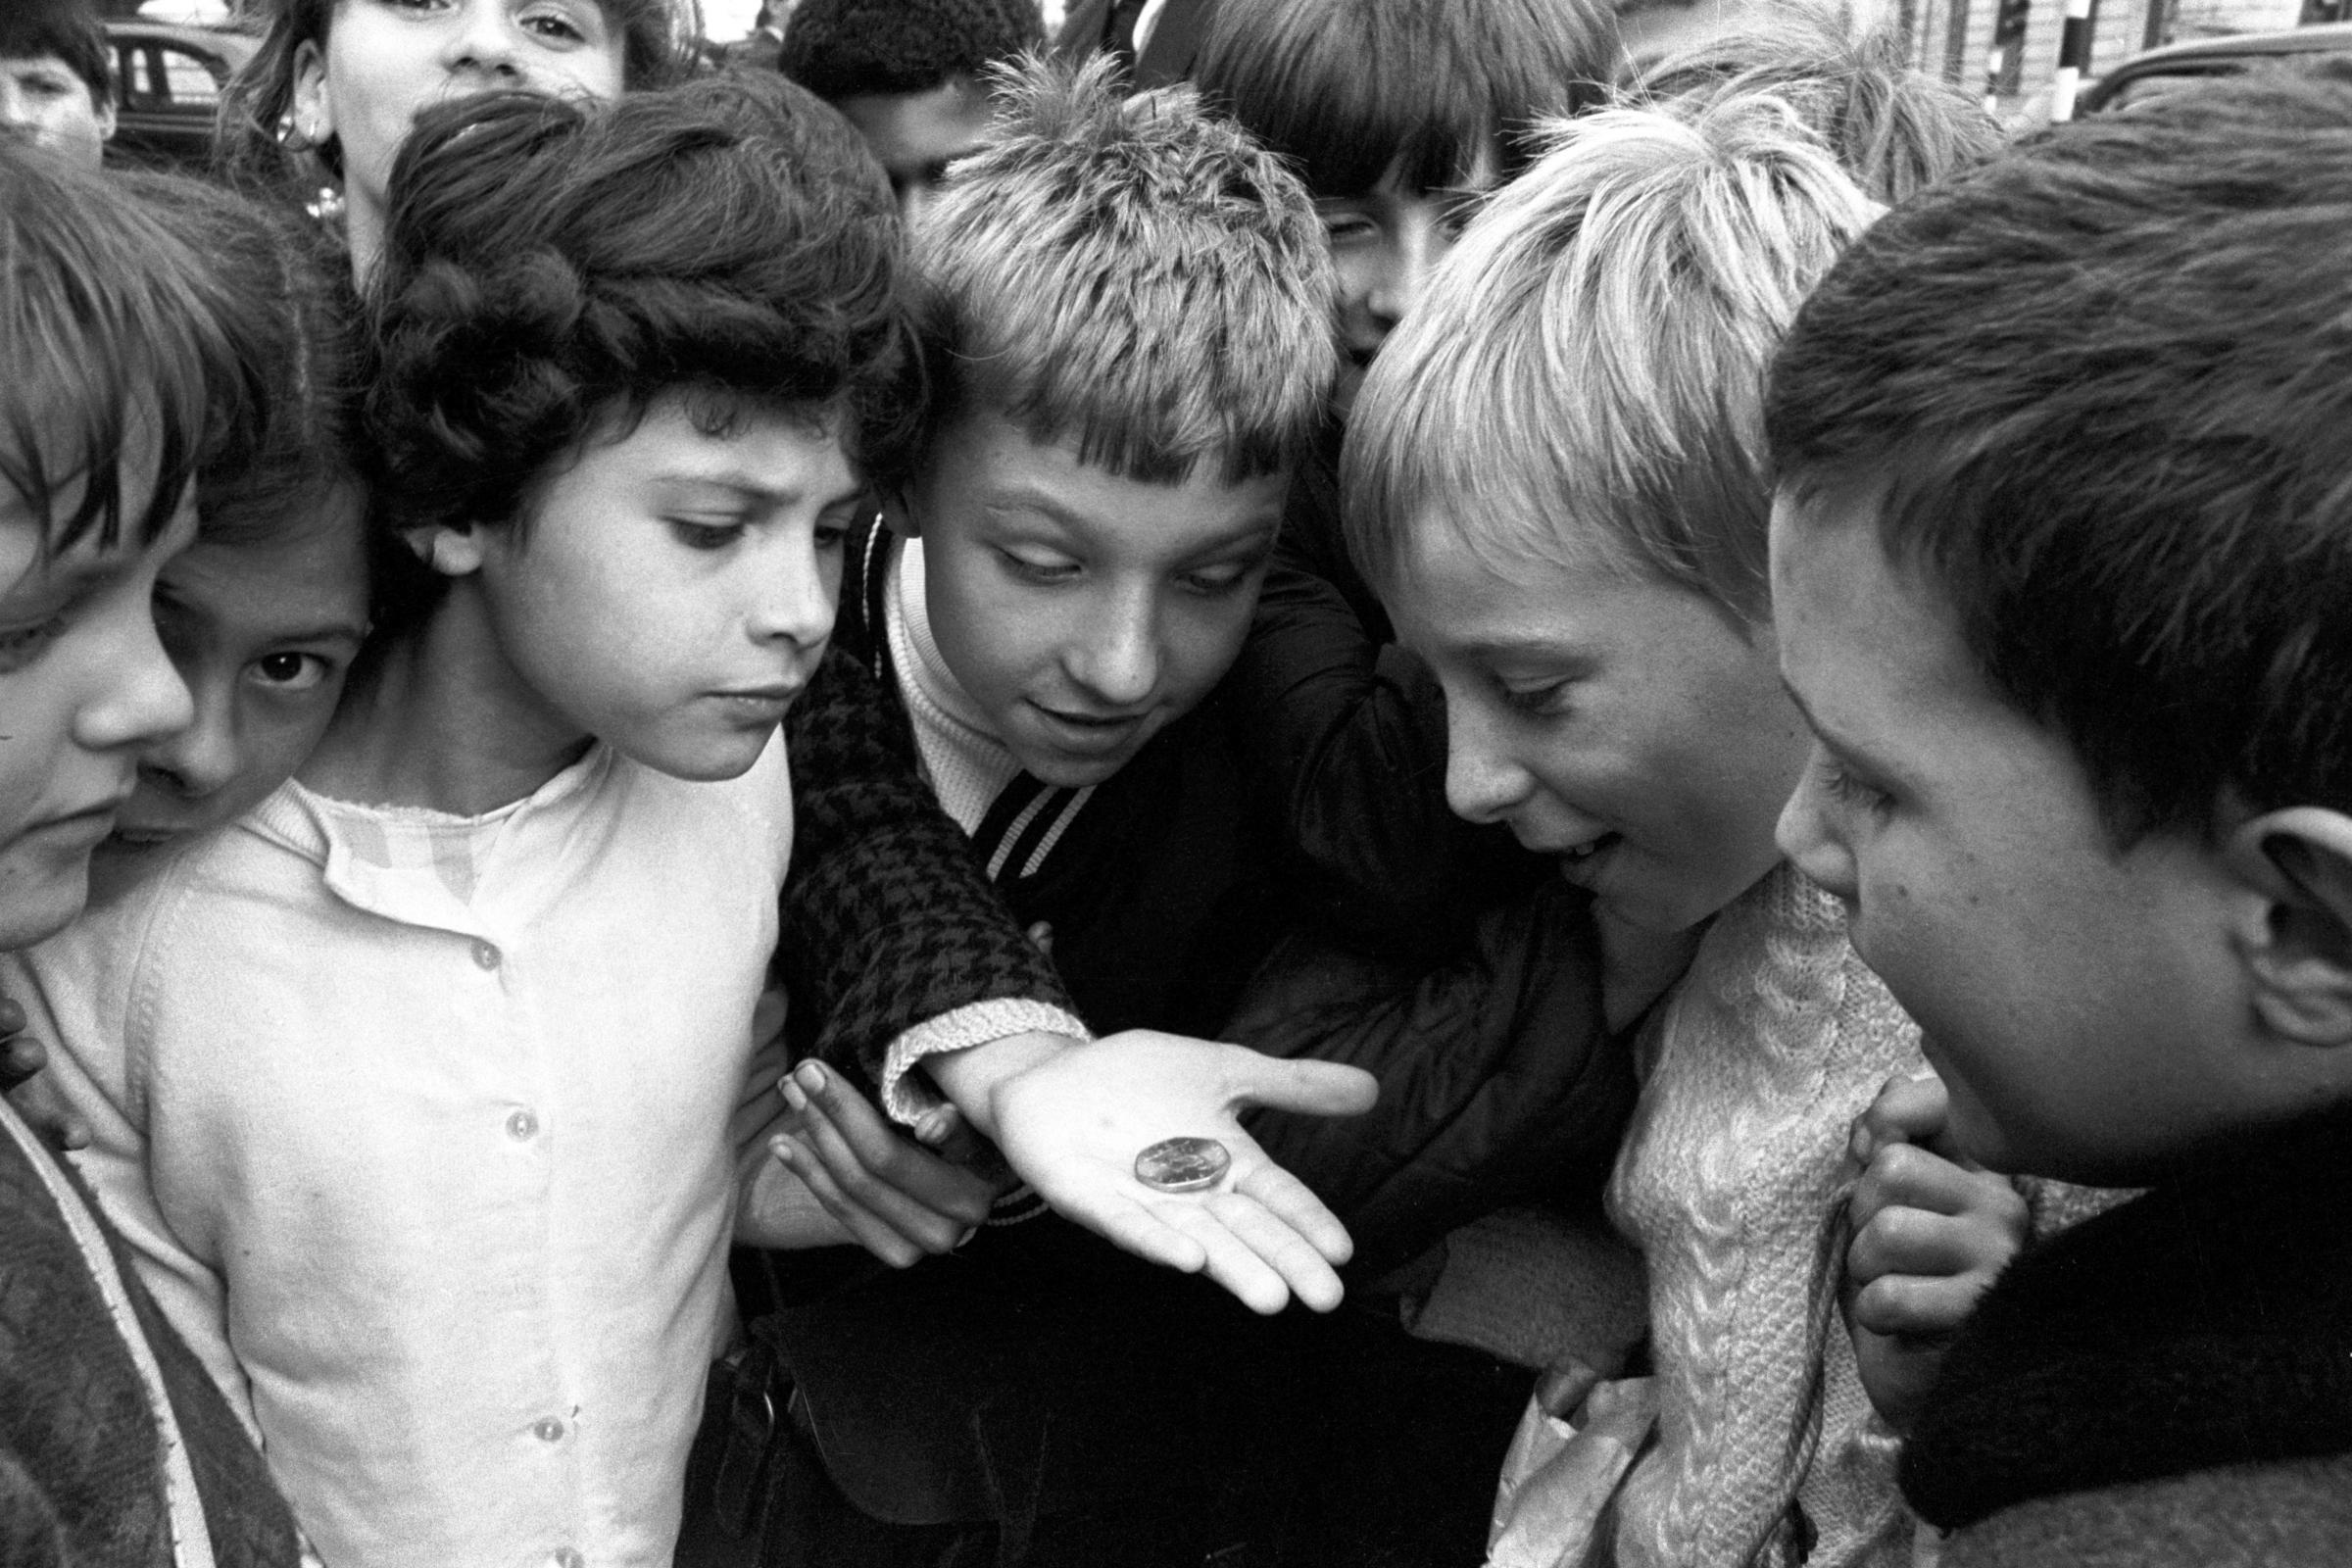 Children in 1969 looking at the new decimal 50 pence coin, the worlds first seven sided coin. The switchover to decimal currency - a move which broke with centuries of monetary tradition - happened 50 years ago this month.